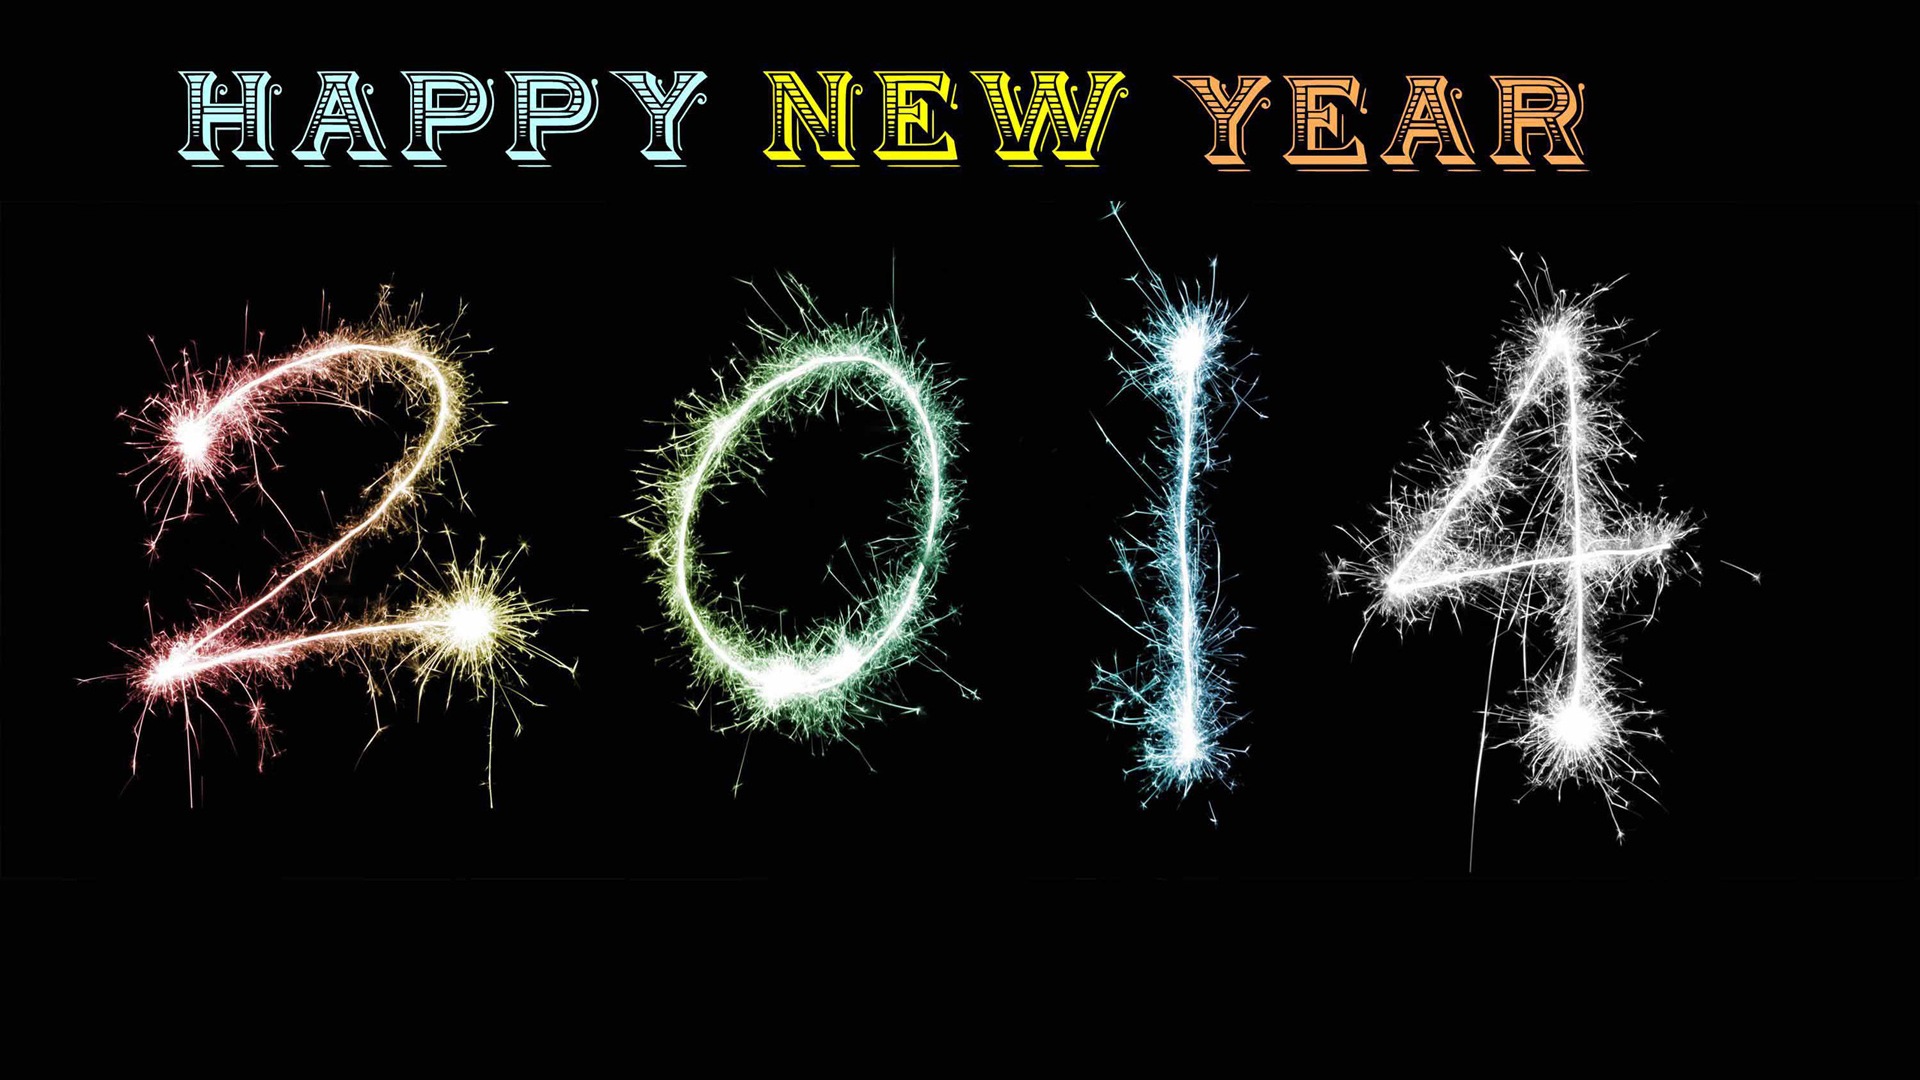 2014 New Year Theme HD Wallpapers (2) #12 - 1920x1080